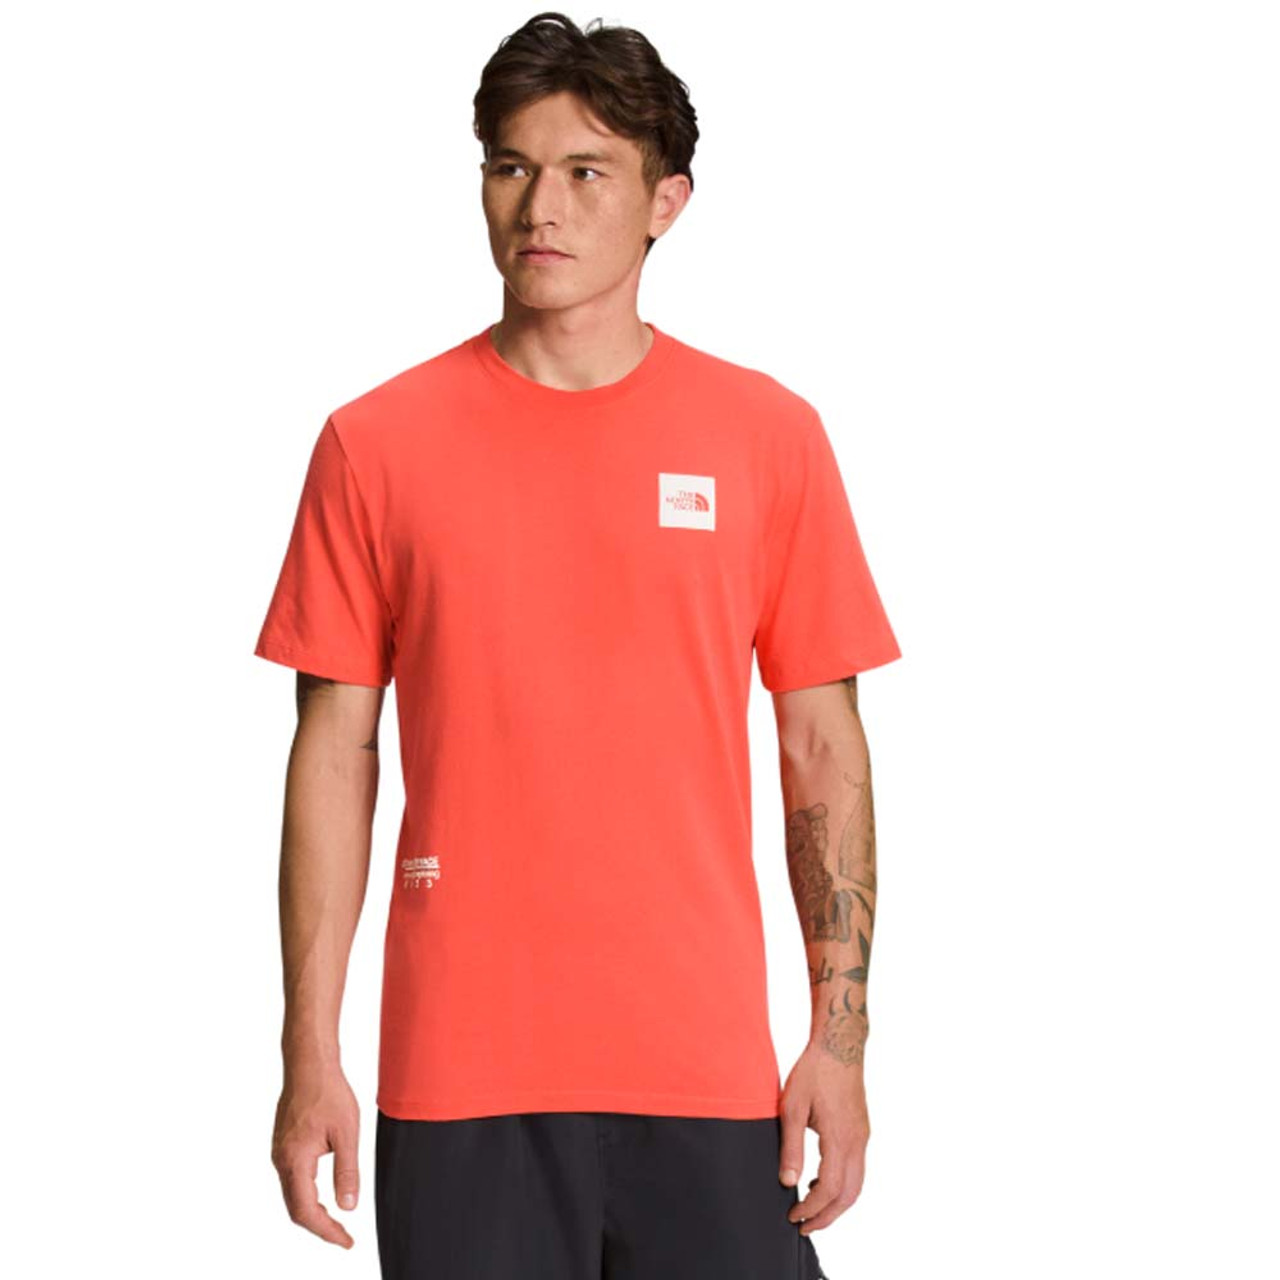 Men's The North Face Brand Proud T-Shirt | Eagle Eye Outfitters